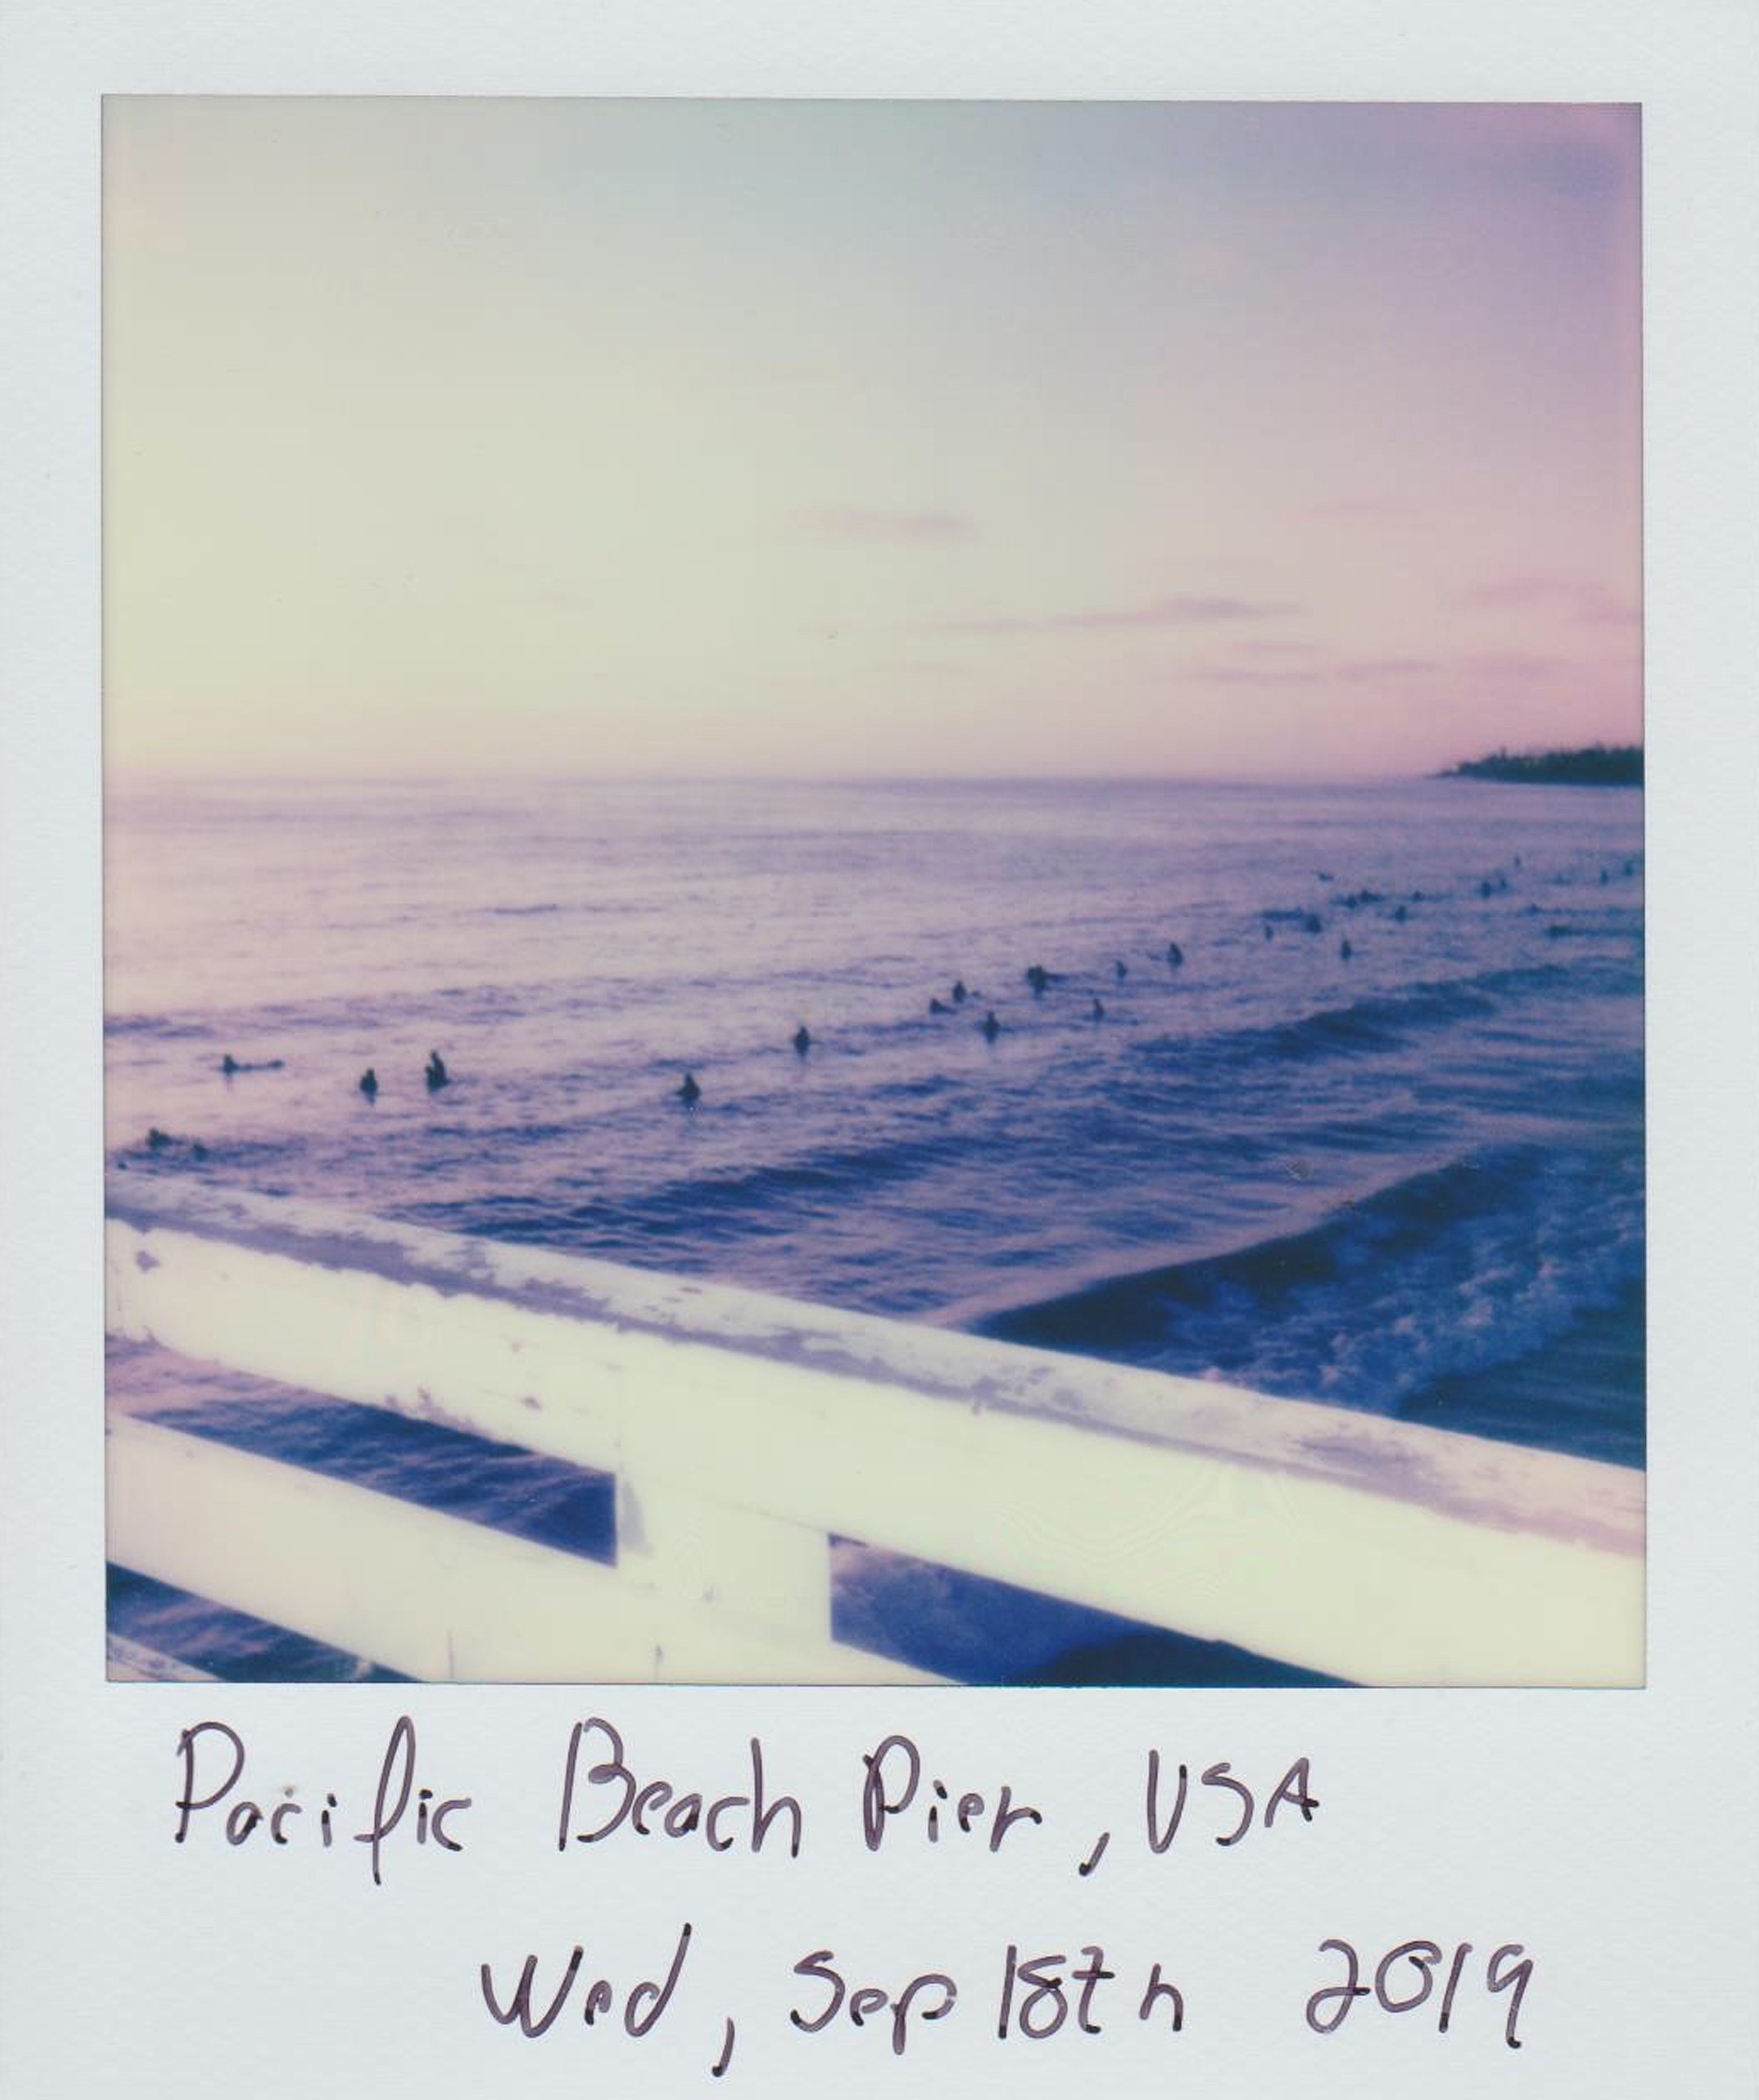 Polaroid of the Pacific Beach Pier in California, USA. The pier is white and has a wooden fence. The ocean is blue and has many surfers in it. The sky is pink. - Polaroid